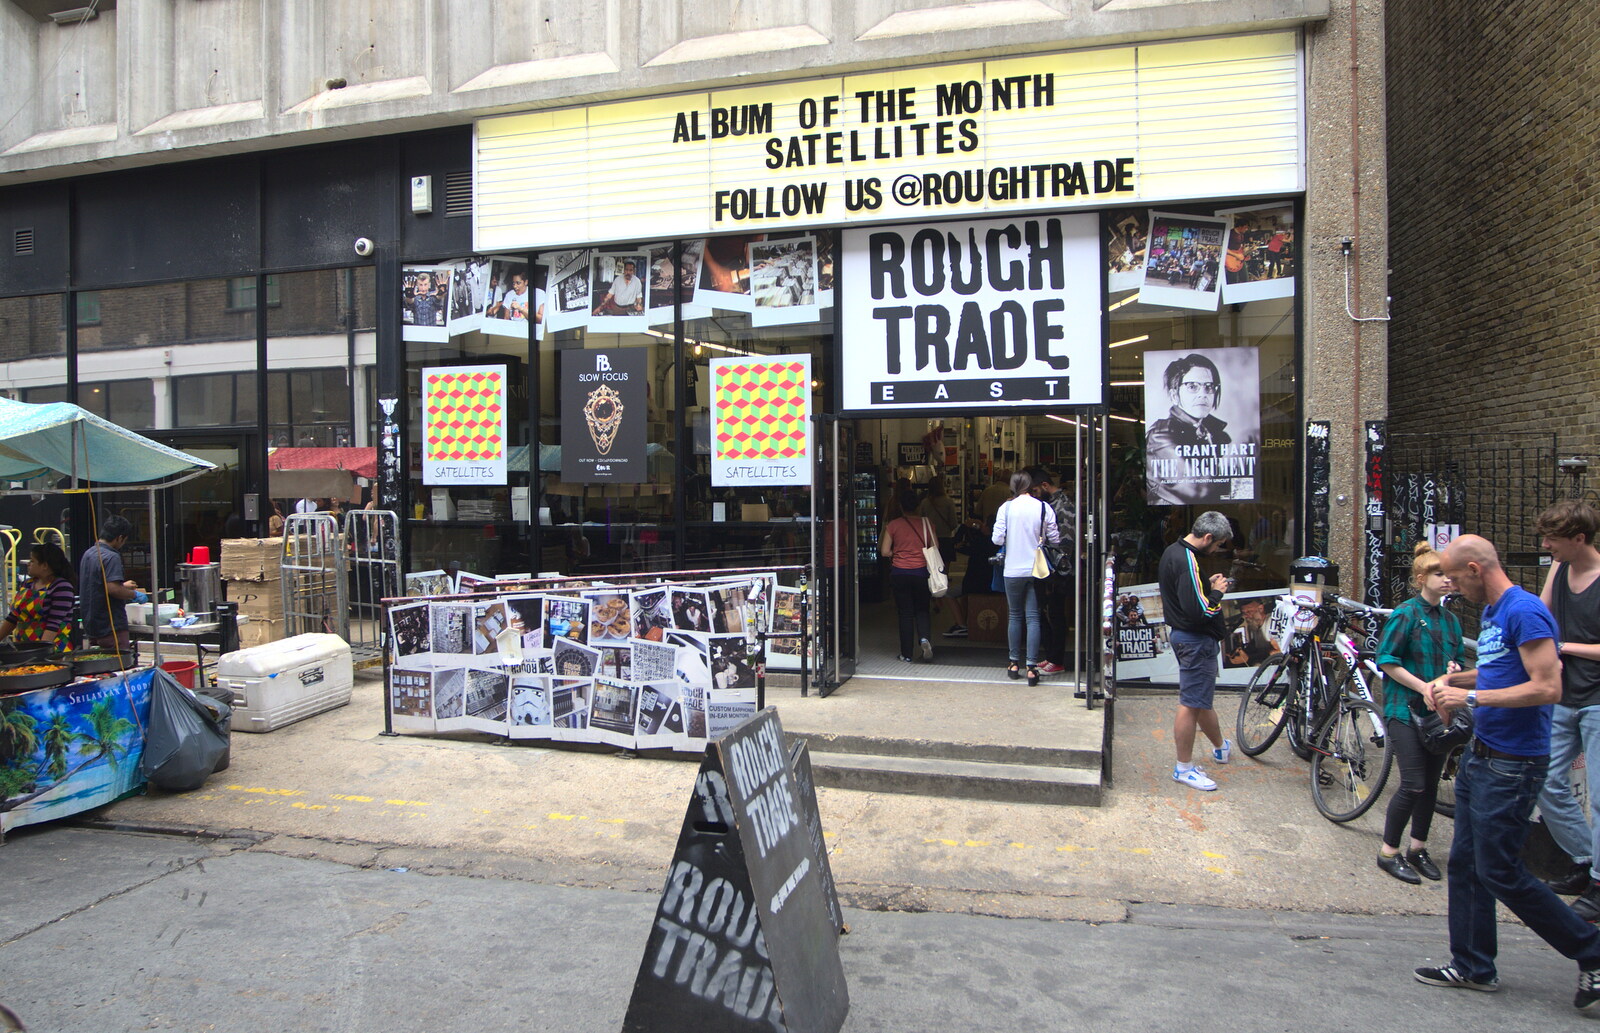 Rough Trade East: a proper record shop from Spitalfields and Brick Lane Street Art, Whitechapel, London - 10th August 2013